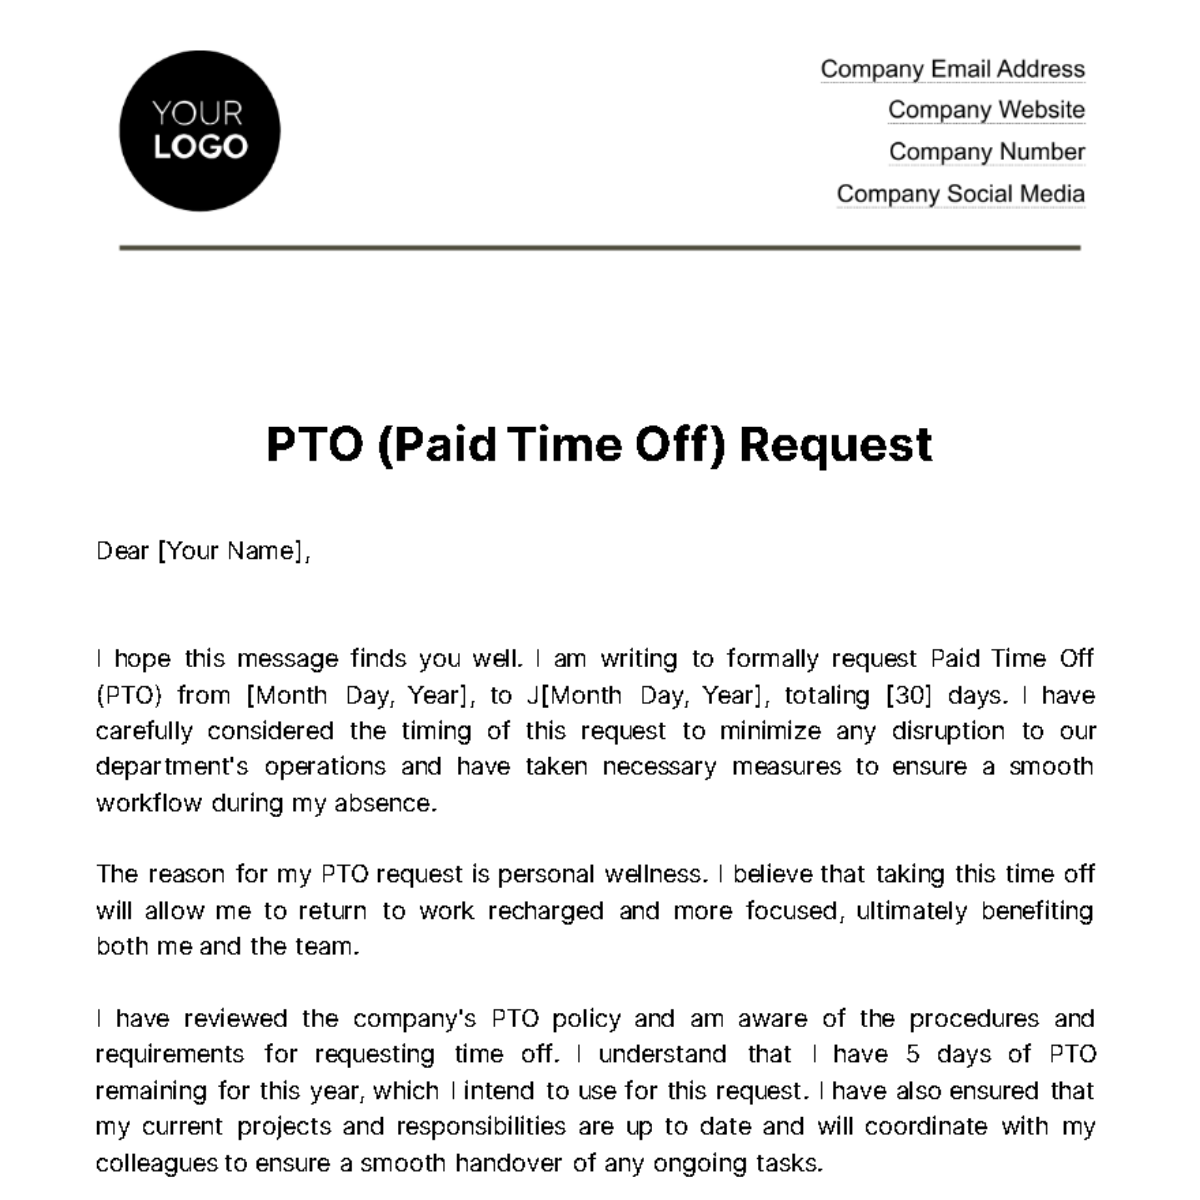 Free PTO (Paid Time Off) Request HR Template